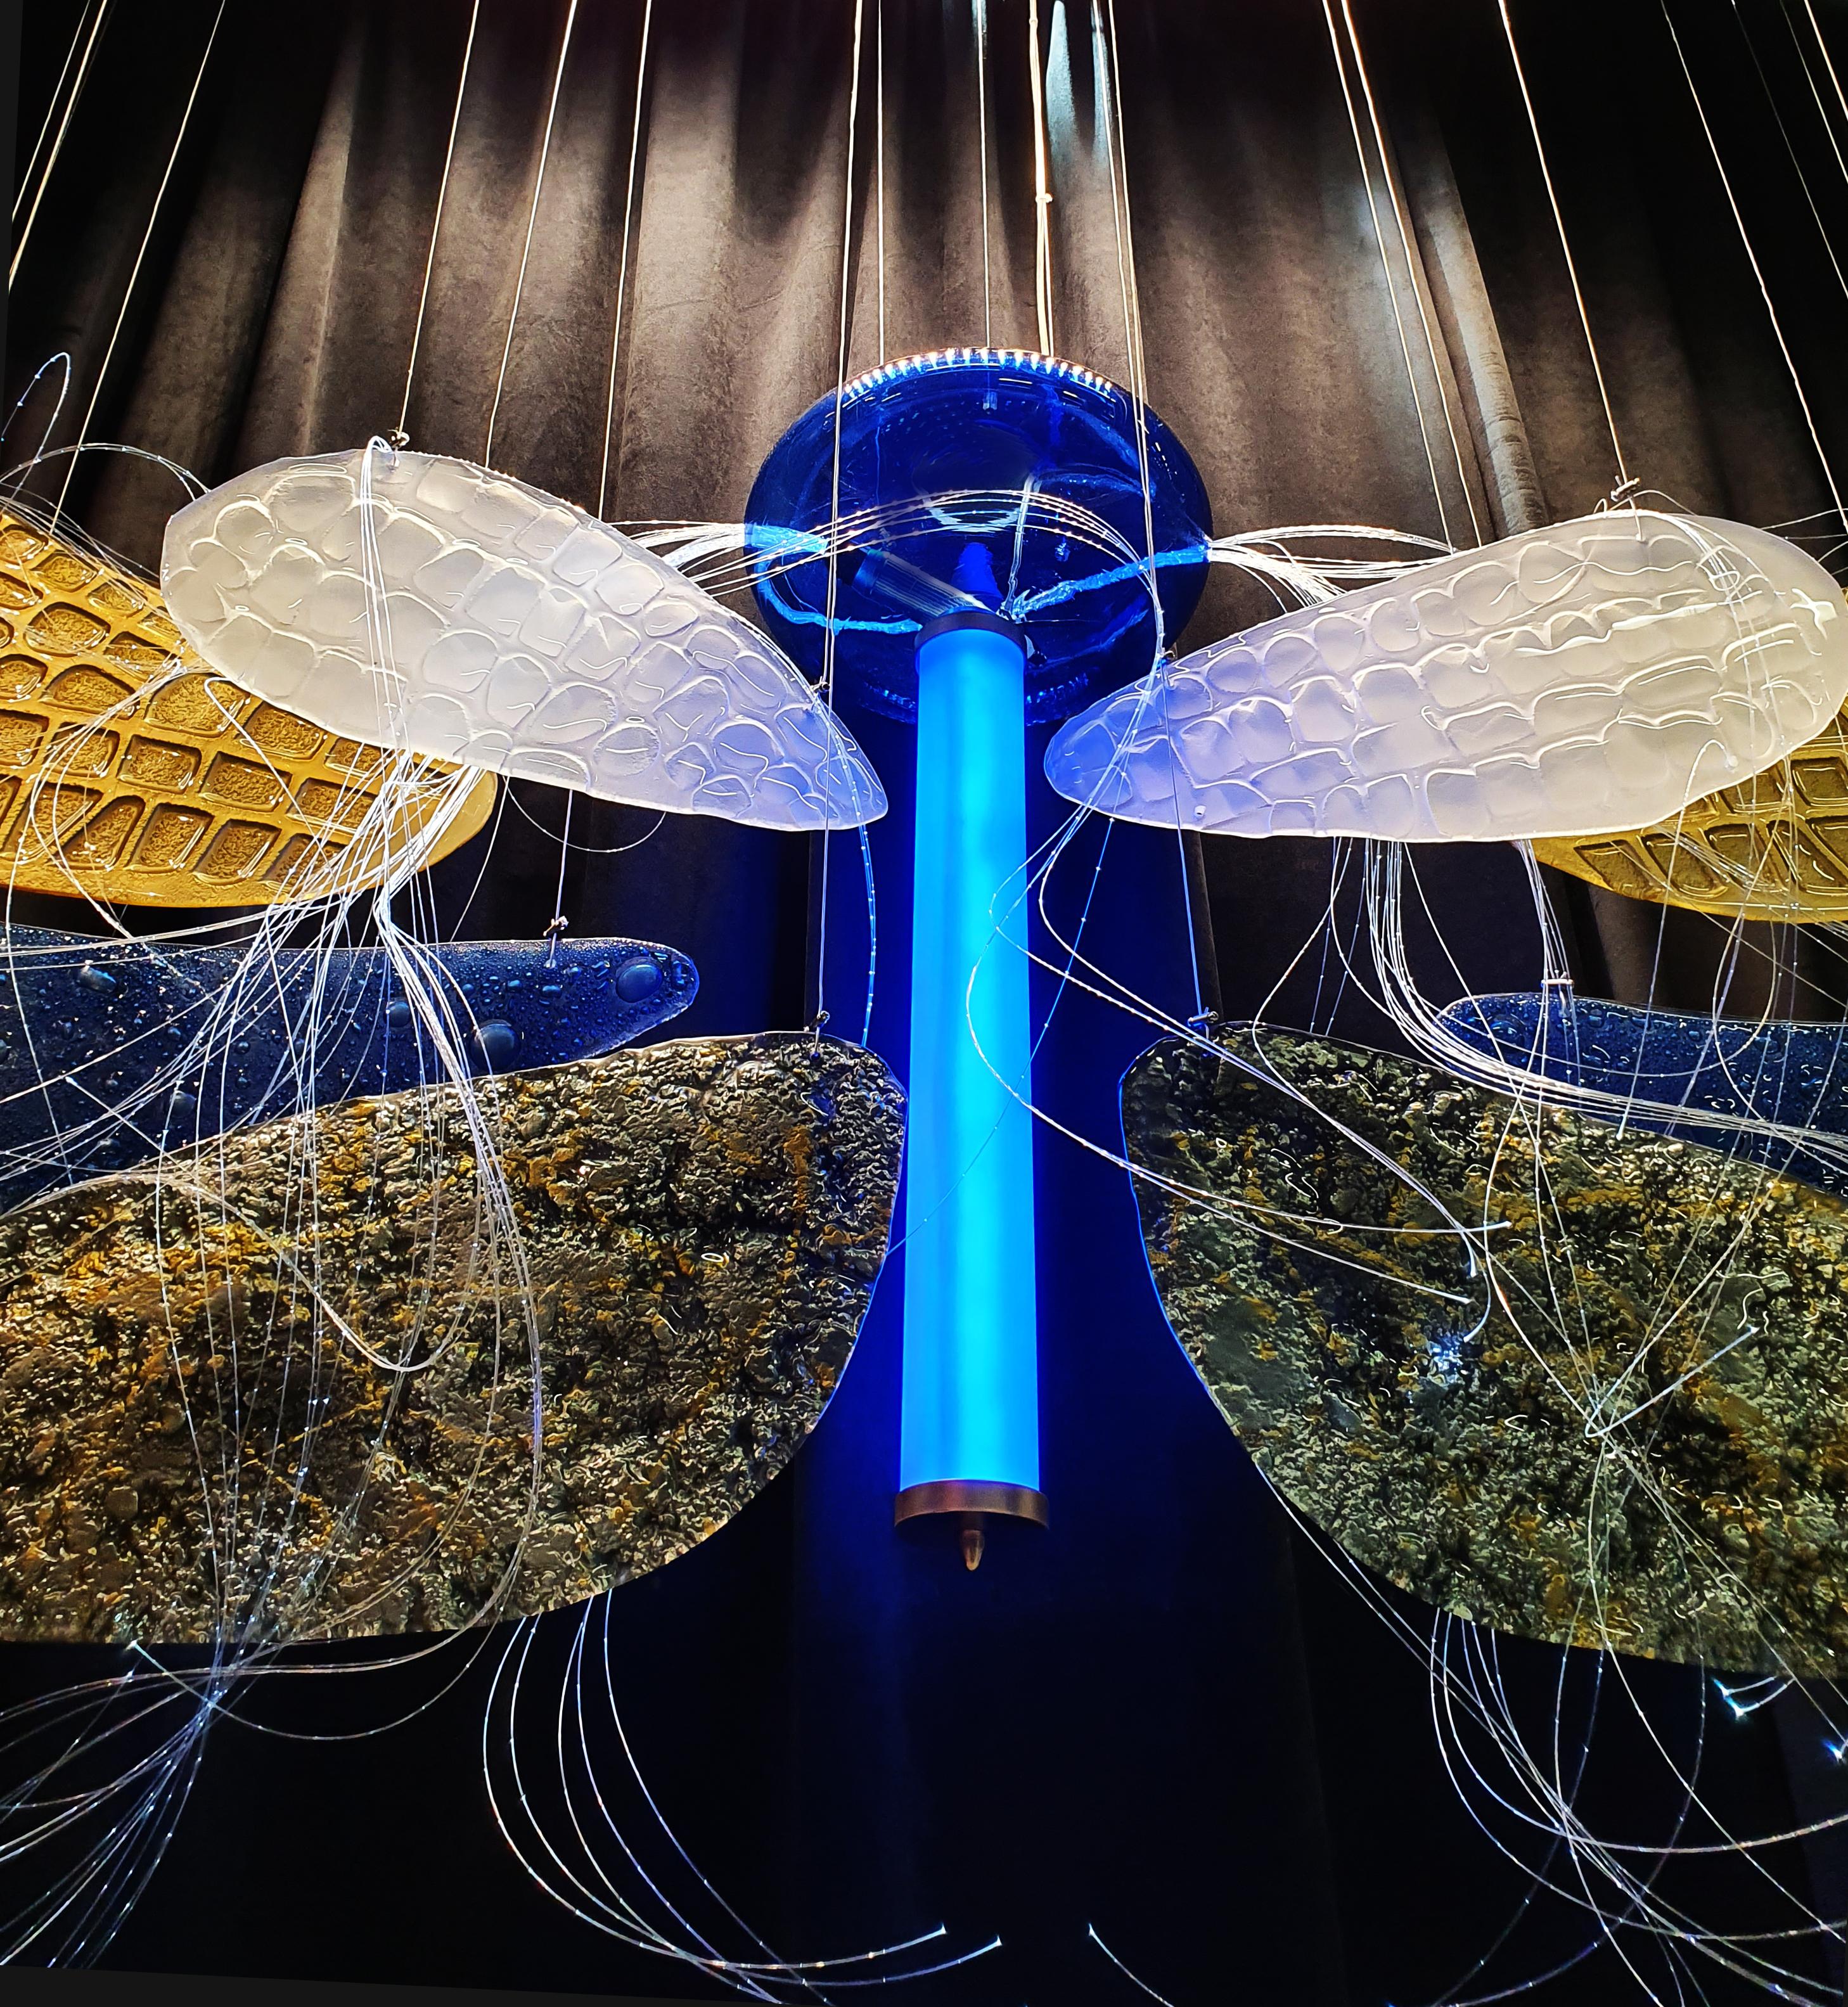 A sculpture, an art installation on a wall, or a lamp combine many elements of art. Inspired by real dragonfly wings, this work of art was shown for the first time in 2019 at the Hotel Show Dubai, which attracted crowds of visitors. The second